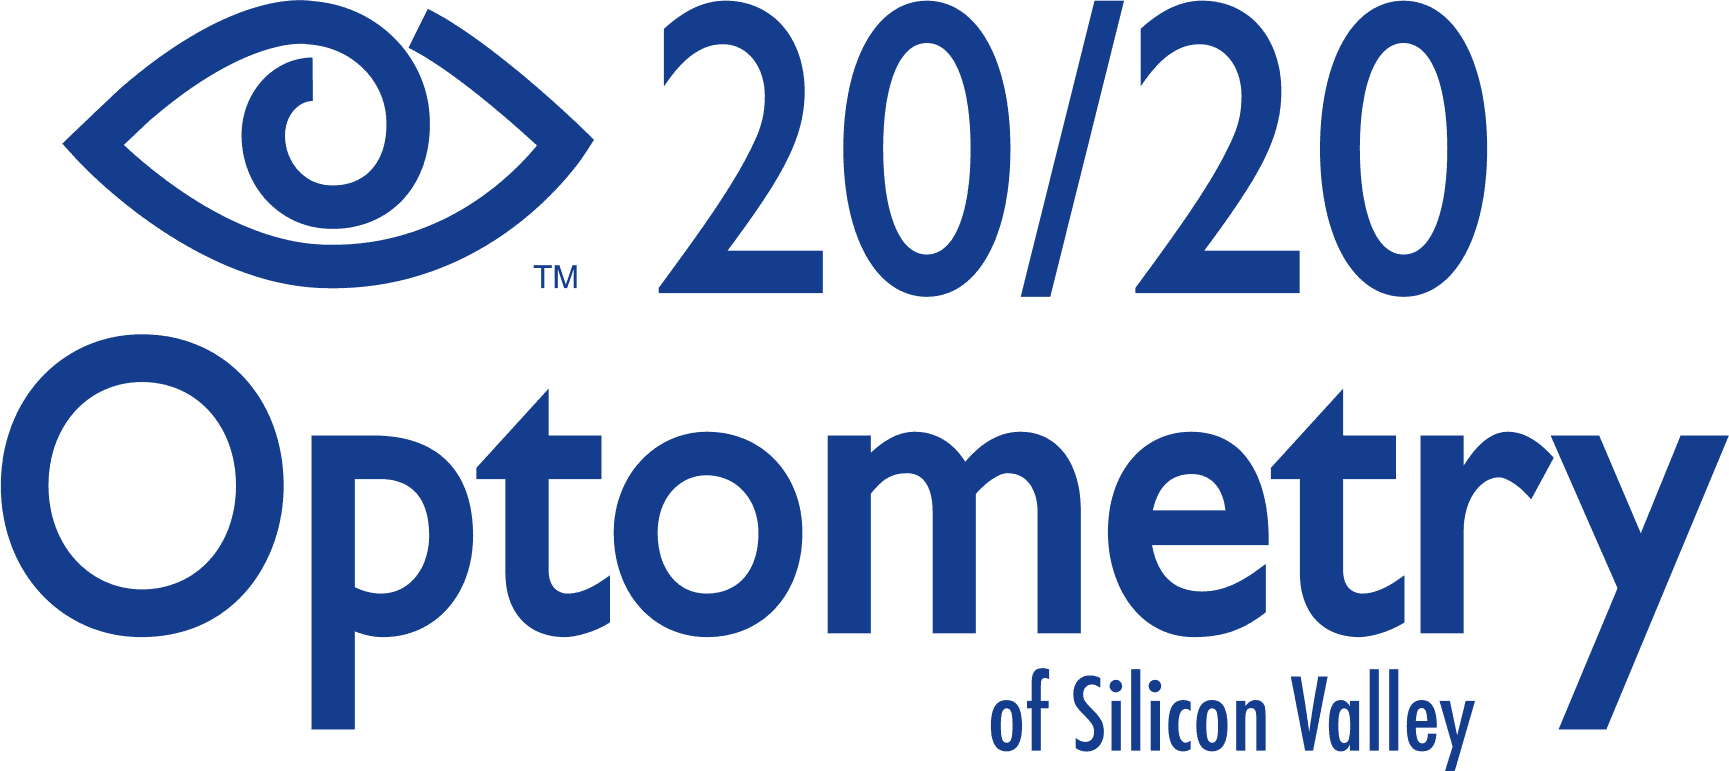 20/20 Optometry of Silicon Valley logo